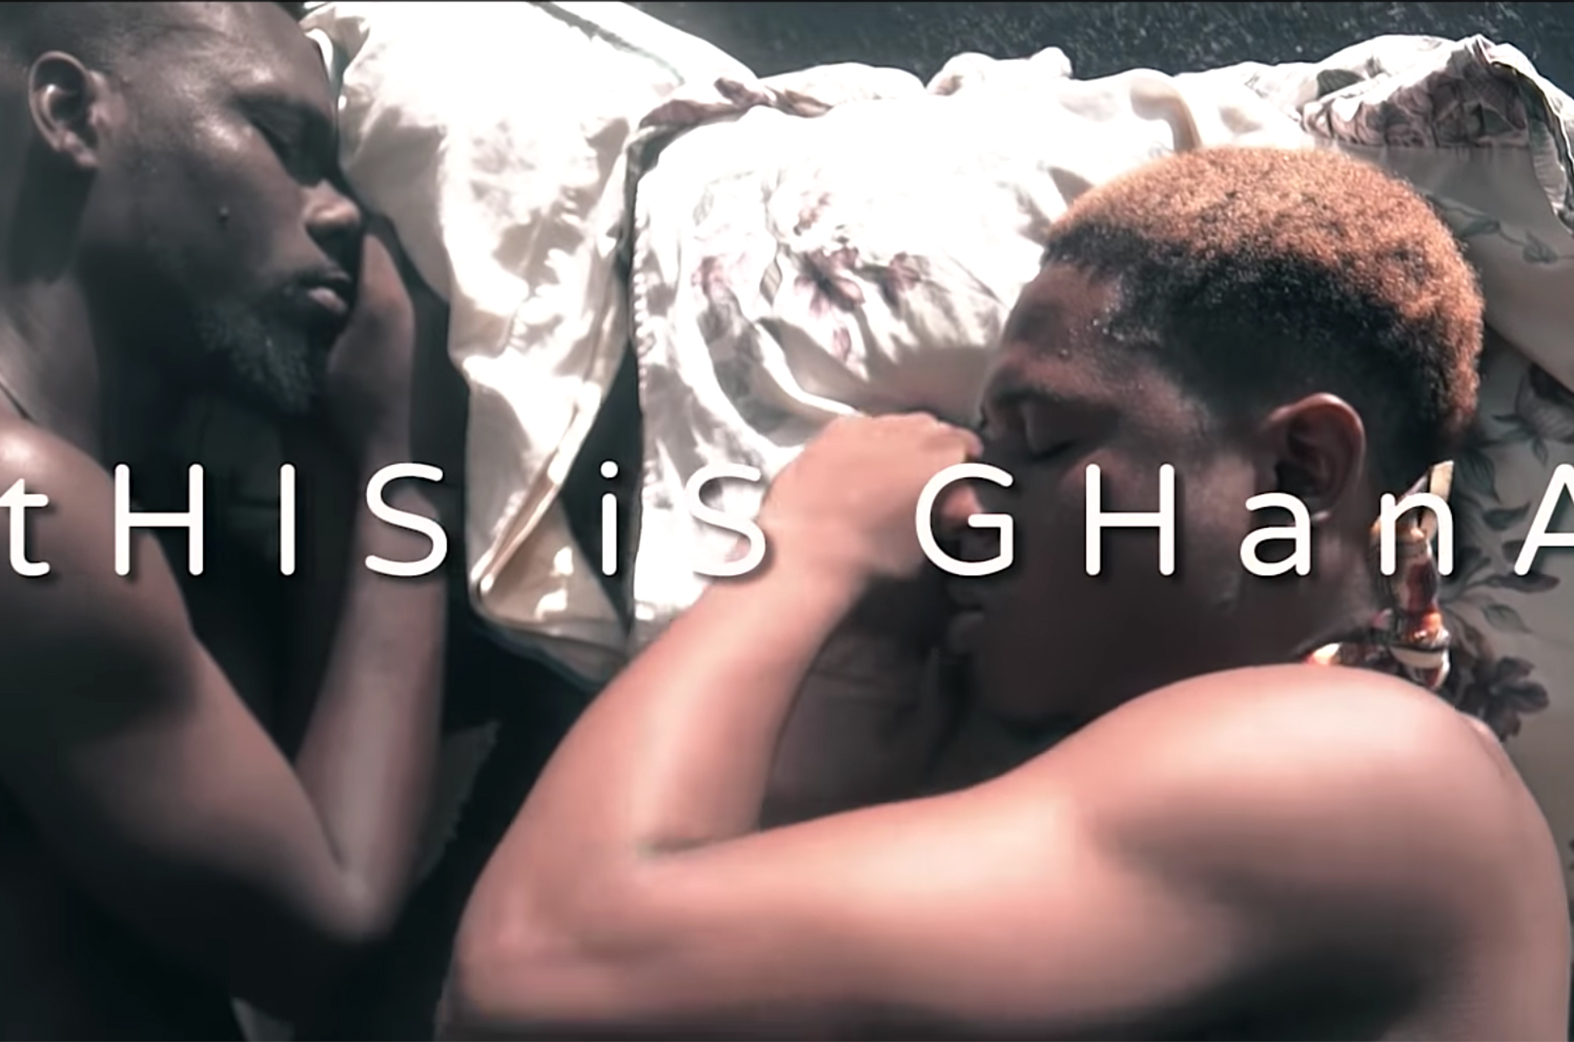 Video: This is Ghana by koboAfrika